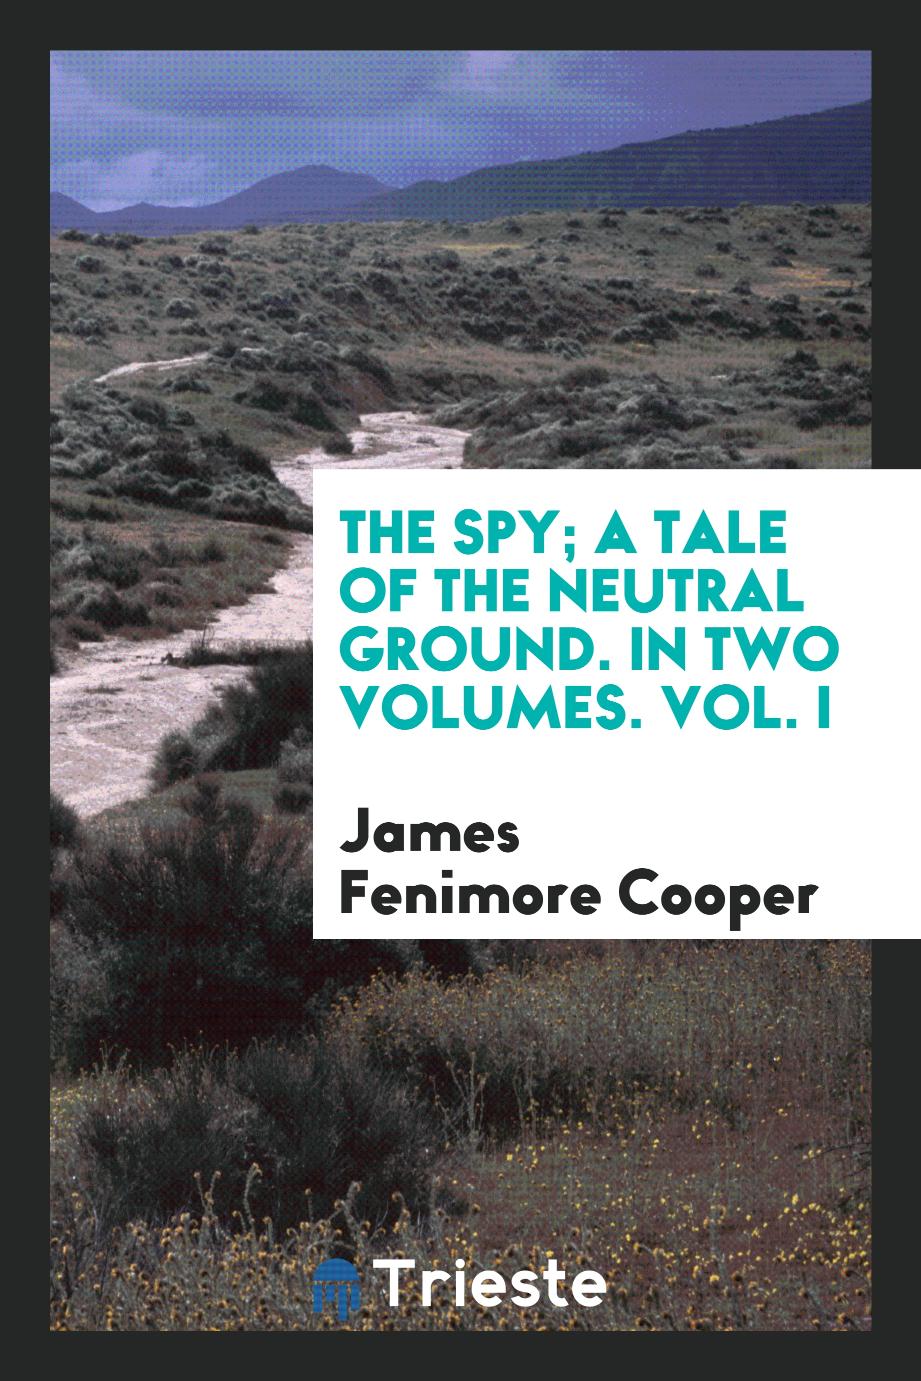 The spy; a tale of the neutral ground. In two volumes. Vol. I